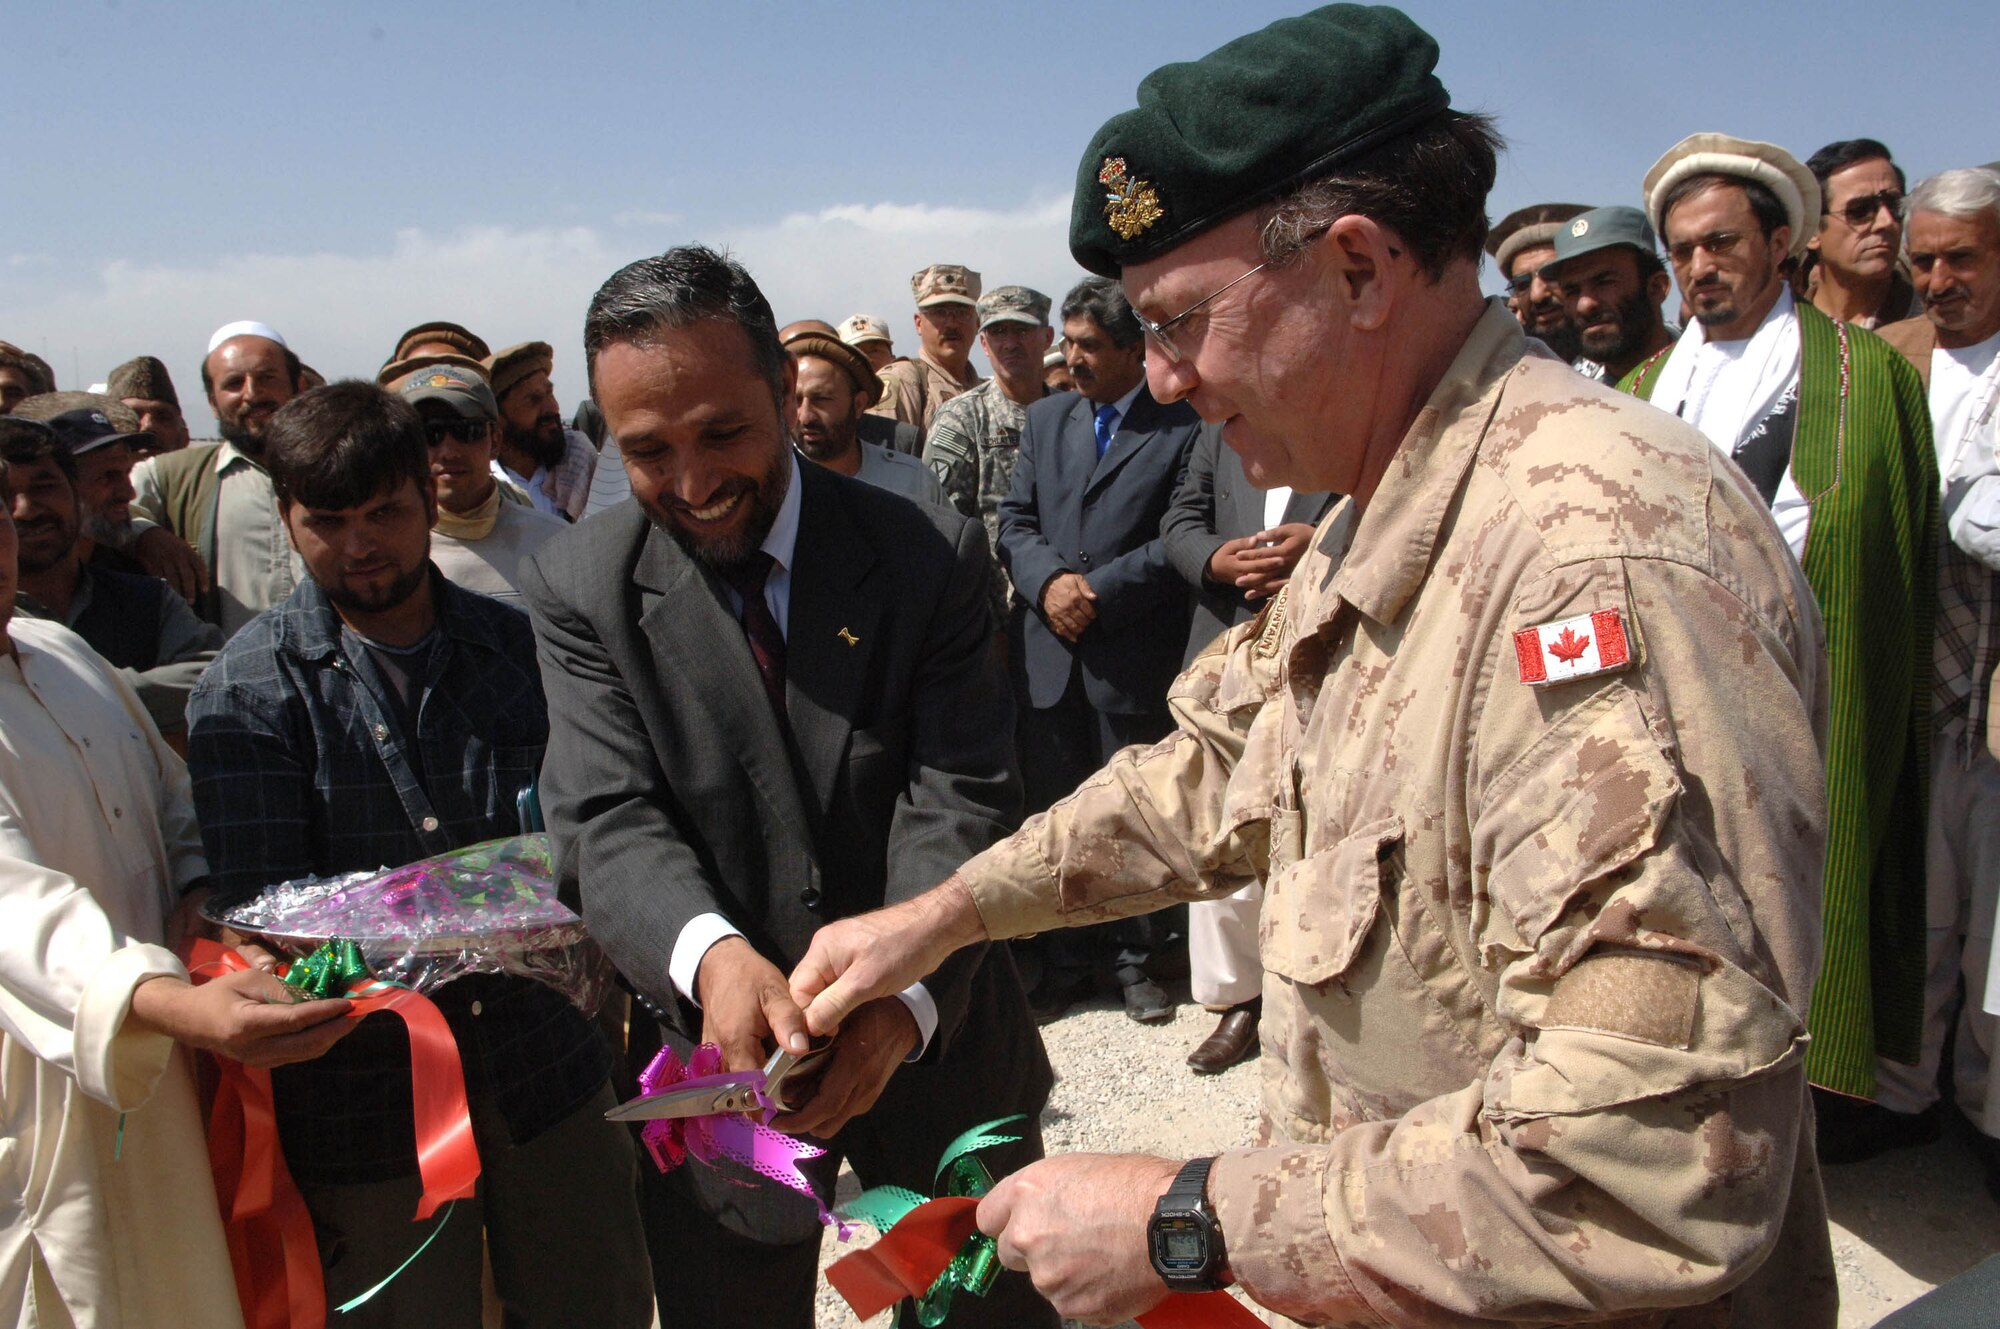 Canadian Brig. Gen. Daniel Pepin cuts the ribbon on the Kapisa road system project in Afghanistan Sept. 29. The $3 million project is the highest construction project ever awarded in the country. When completed, it will be the only province to have all districts and the capitol connected by roads. The general is the deputy commanding general for reconstruction efforts in Afghanistan (U.S. Air Force photo/Tech. Sgt. Joseph Kapinos)